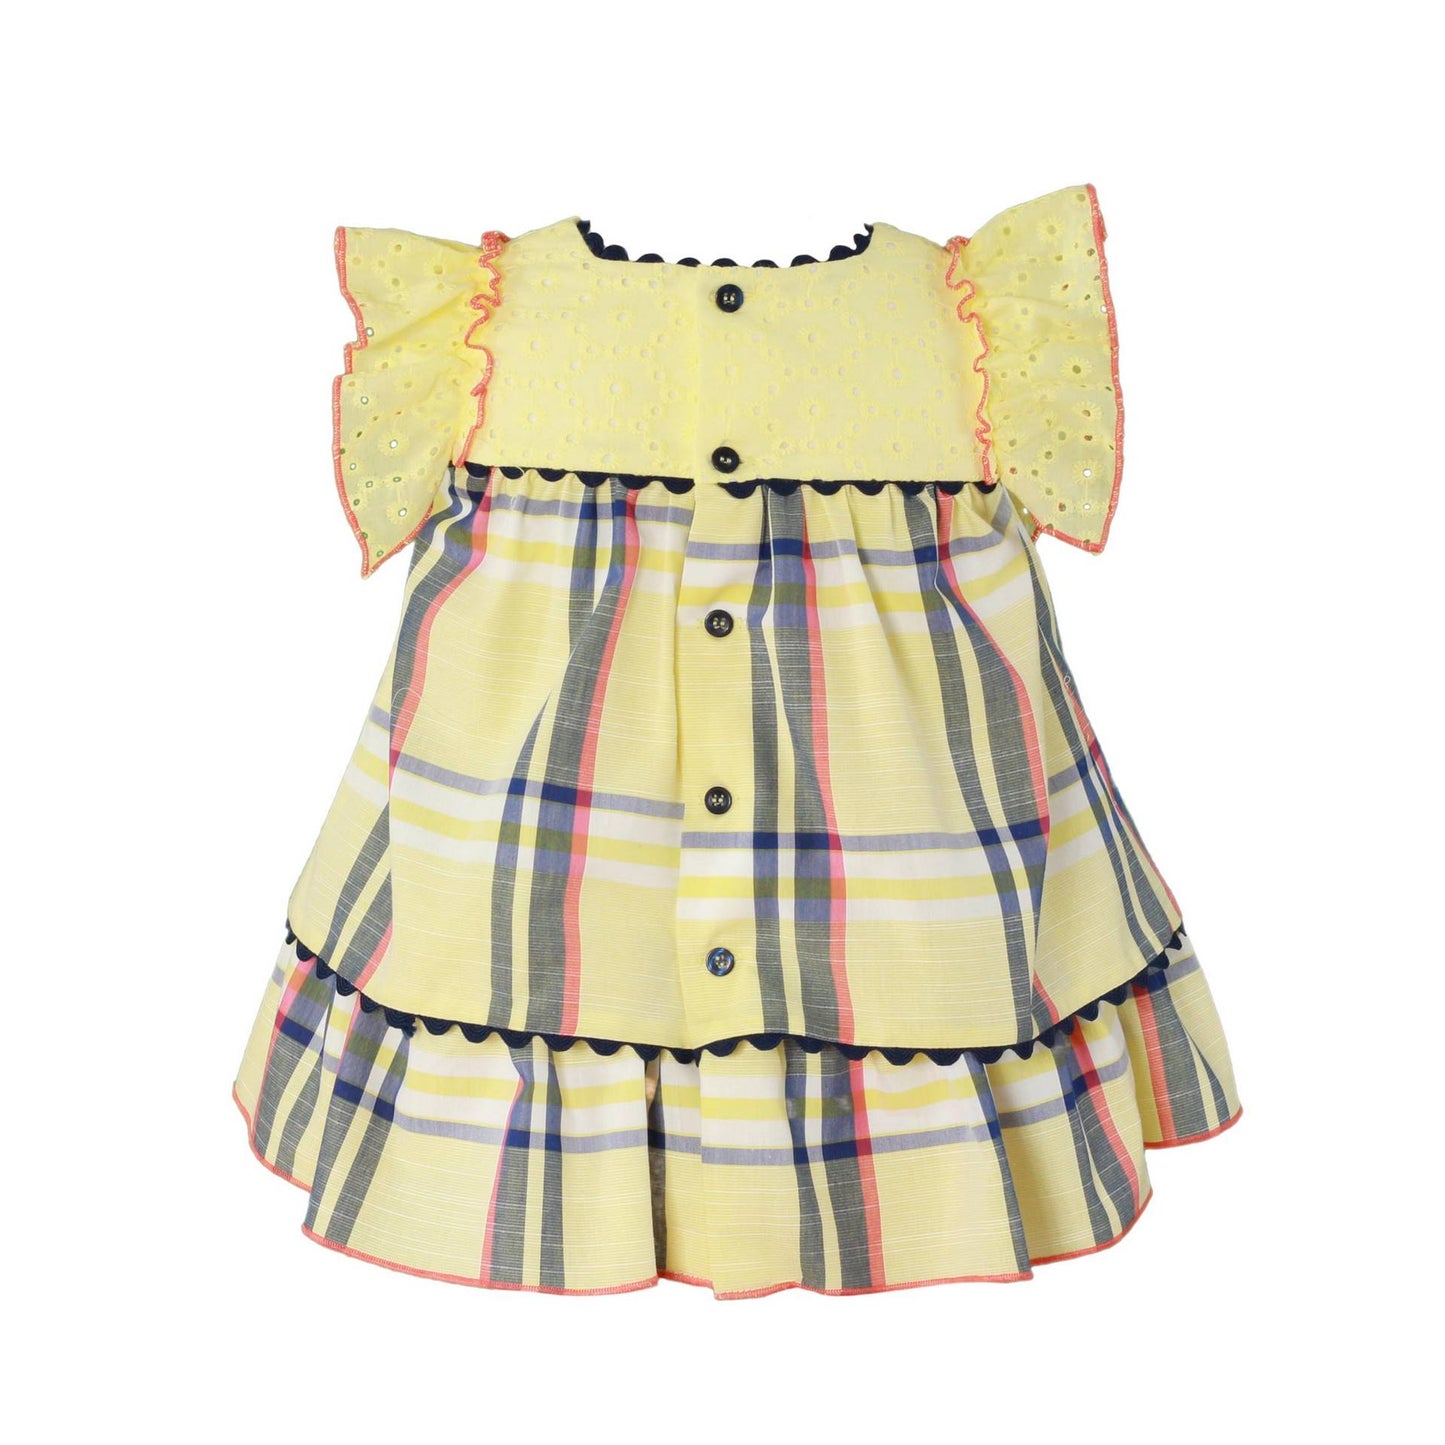 Yellow baby girl and toddler dress with ruffle detail. Soft and lightweight material for comfortable to wear